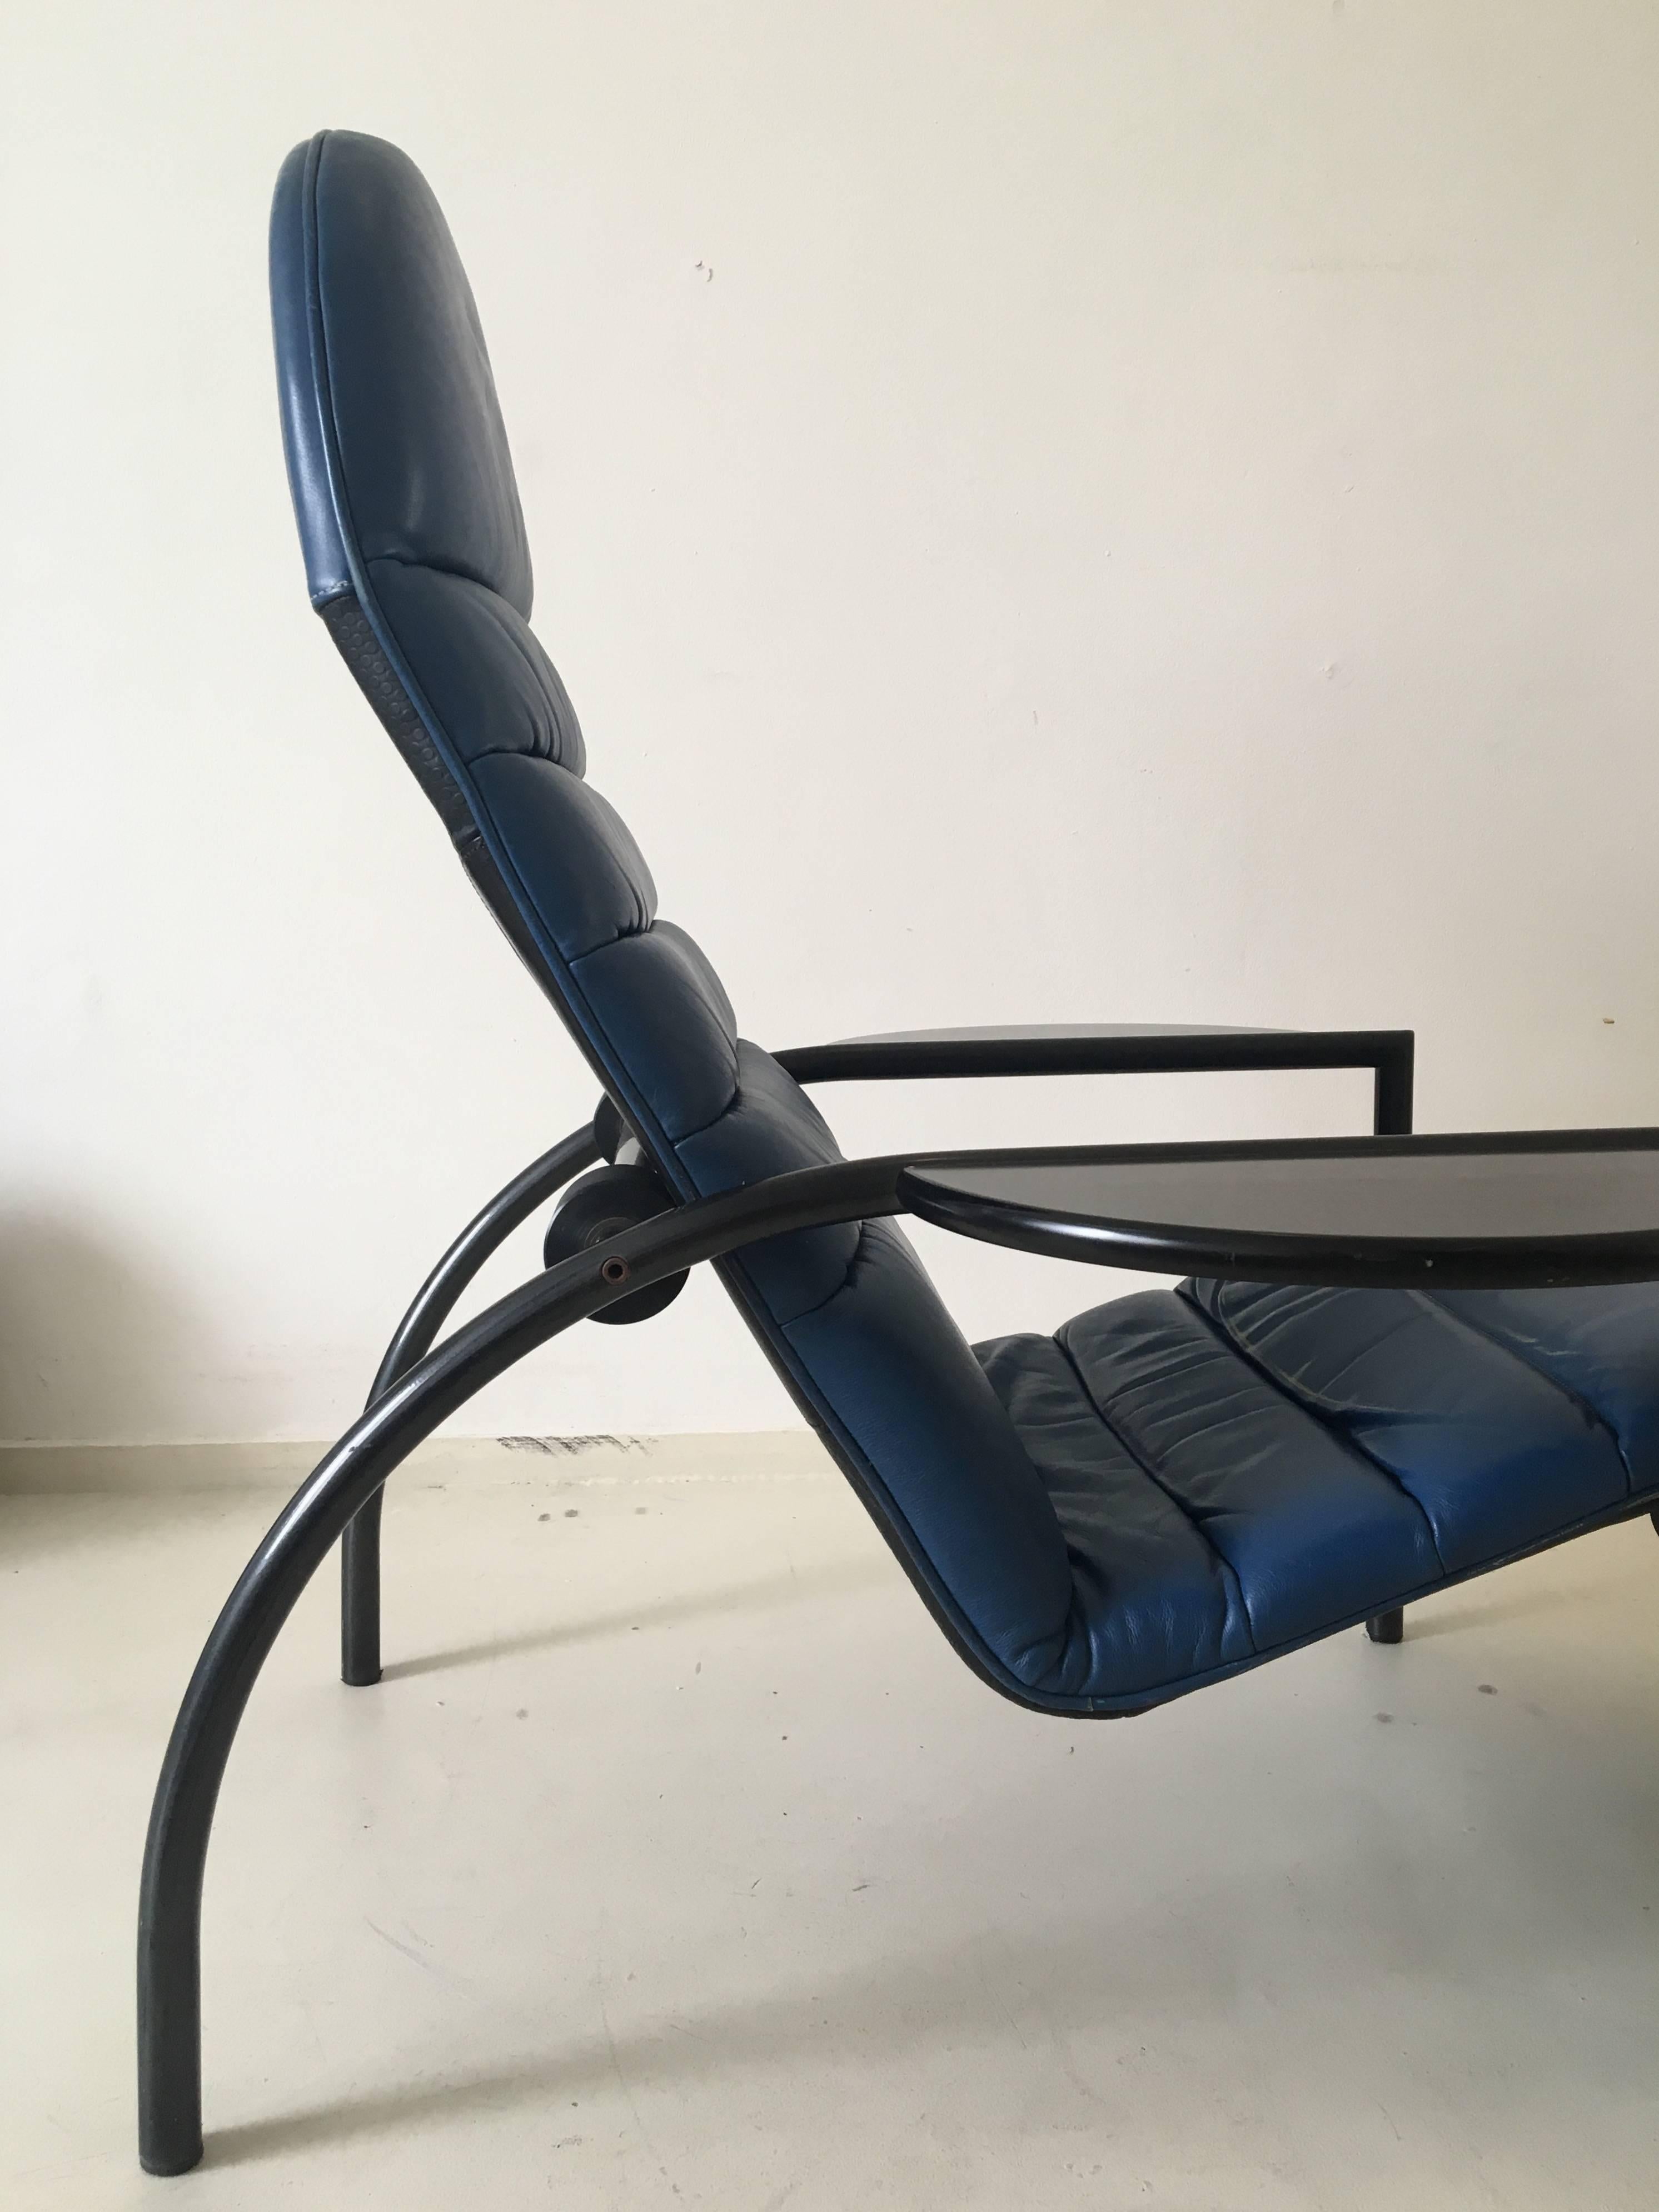 Metal Extreme Rare Adjustable Lounge Chair by Ammanati and Vitelli for Moroso, 1980s For Sale